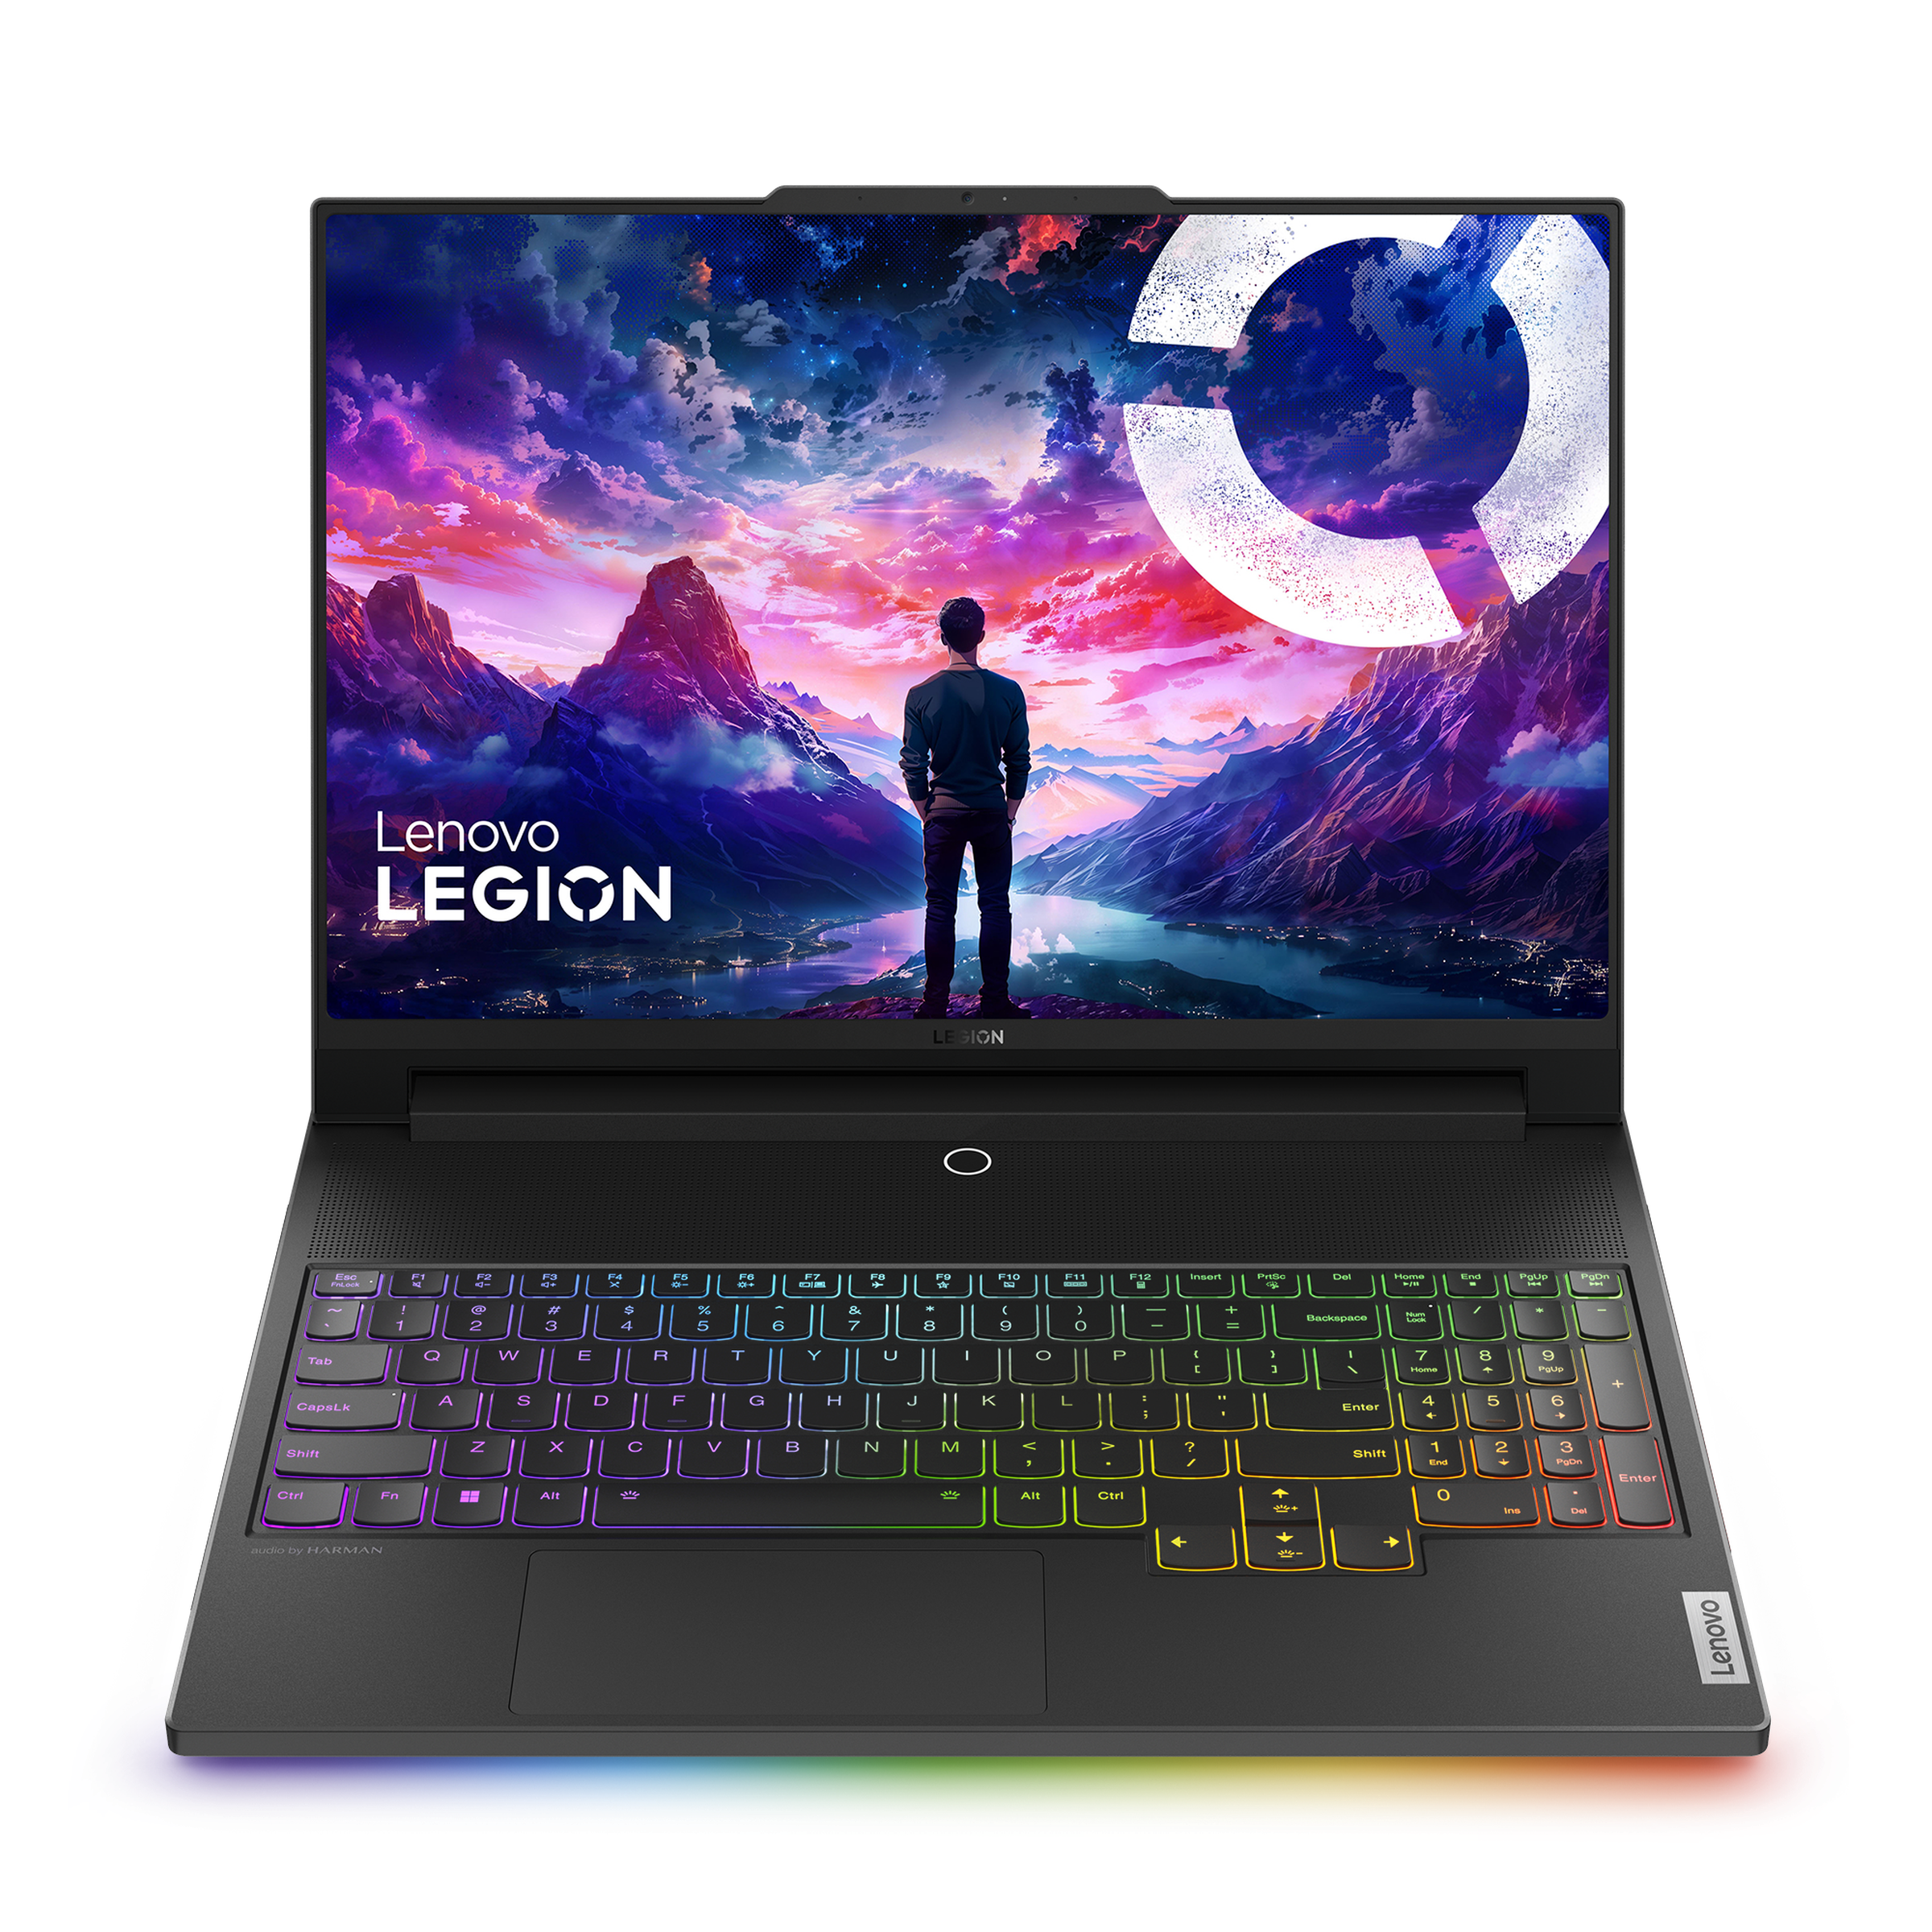 The Lenovo Legion displays a picture of a figure standing in a mountainous setting over a white background.